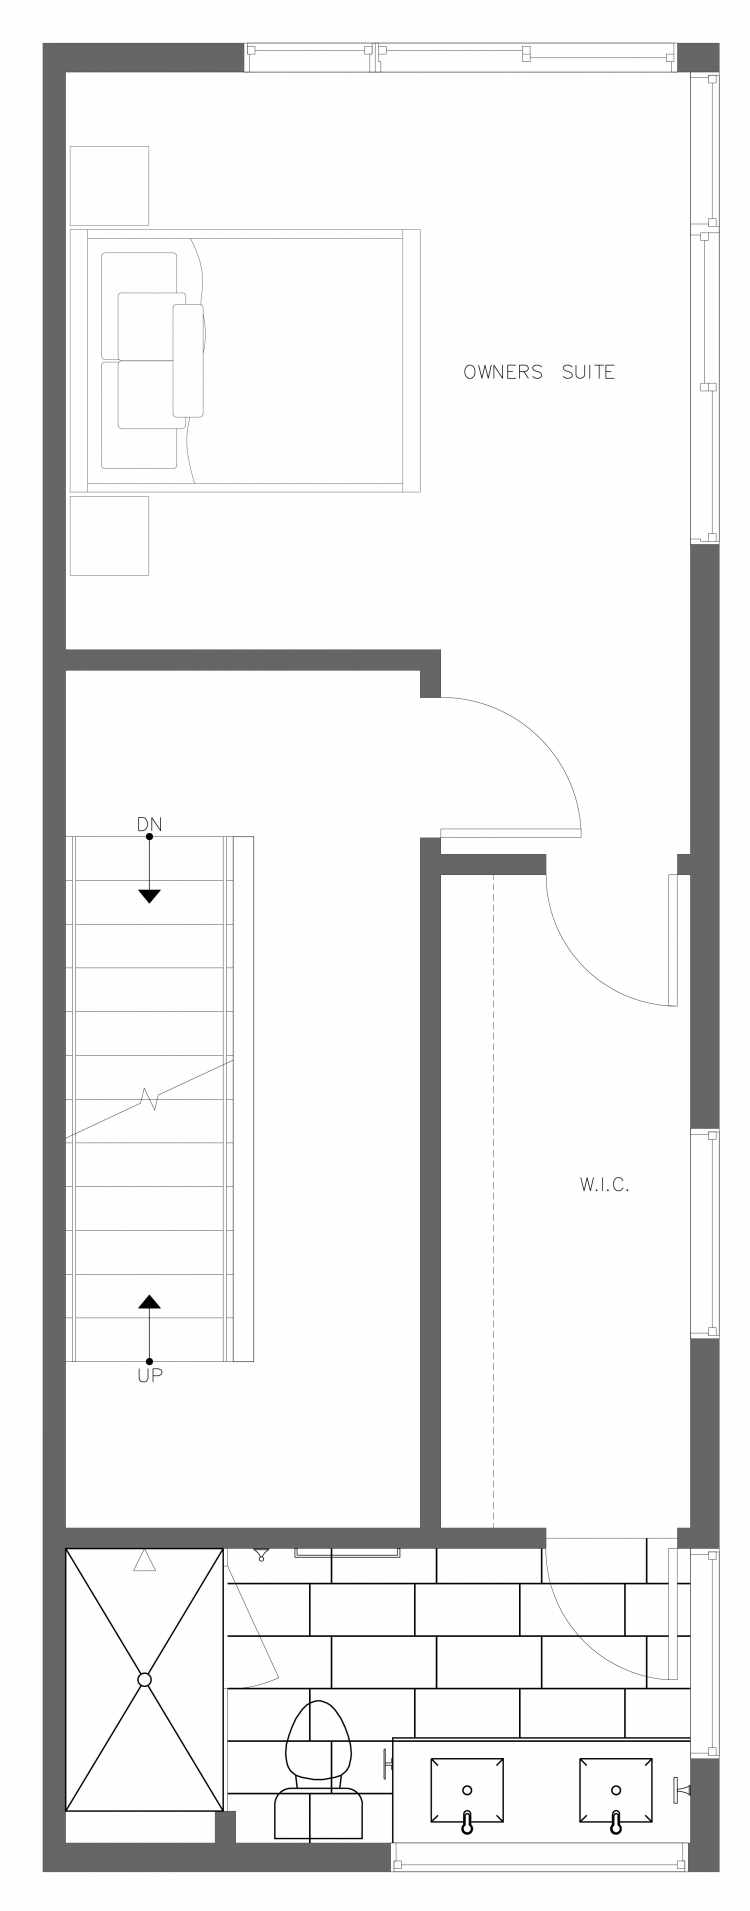 Third Floor Plan of 3410B 15th Ave W, One of the Arlo Townhomes in North Queen Anne